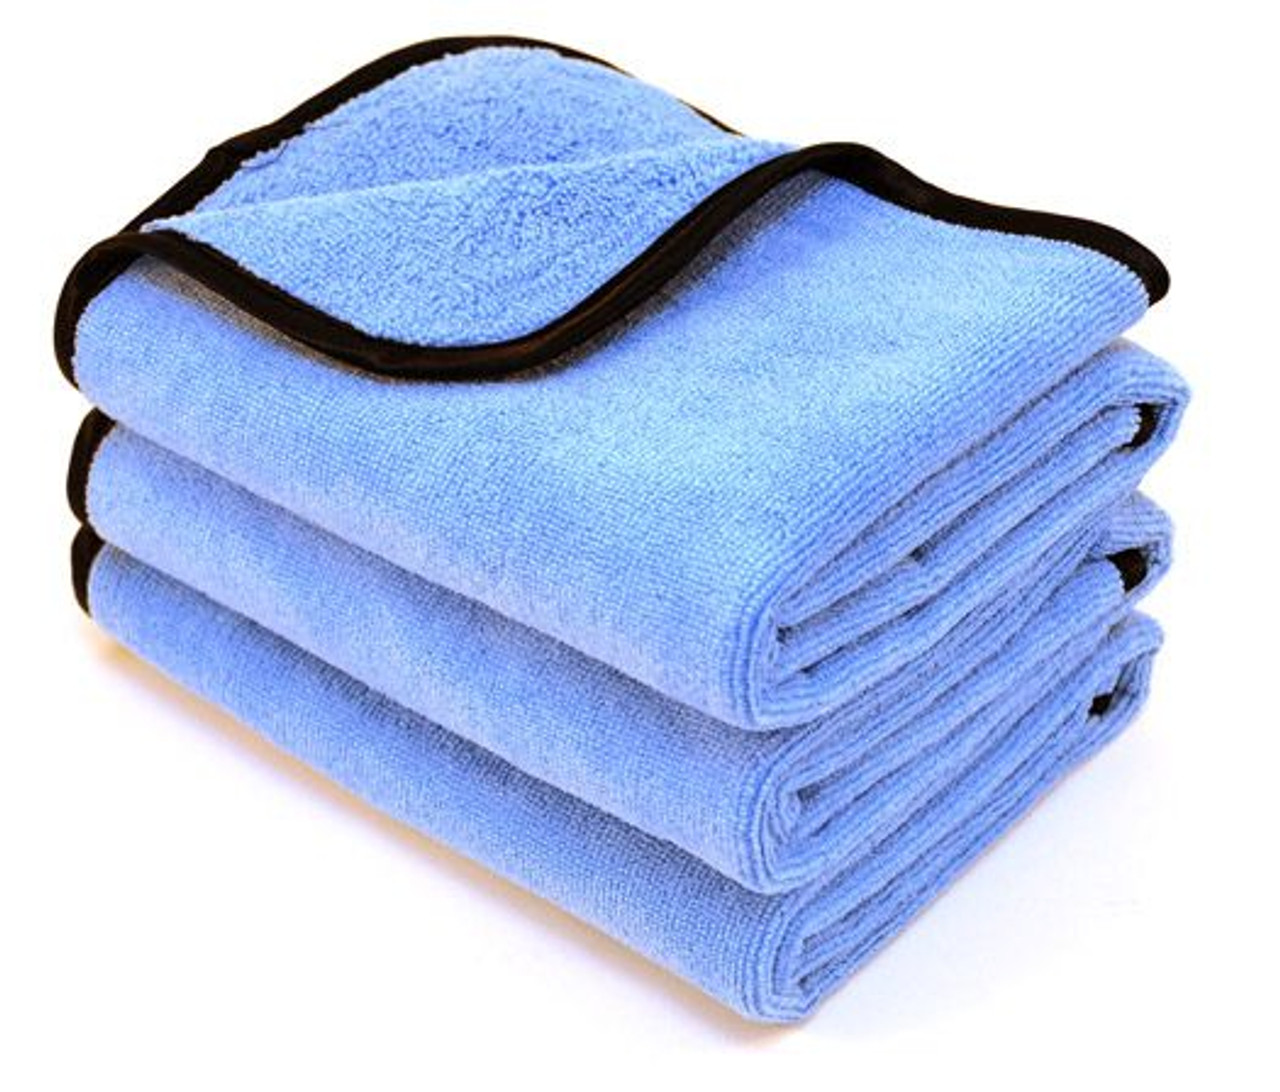 https://cdn11.bigcommerce.com/s-82c91564ki/images/stencil/1280x1280/products/7016/7556/miracle-towel-16-x-24-inches-3-pack-16__38748.1684255286.jpg?c=1